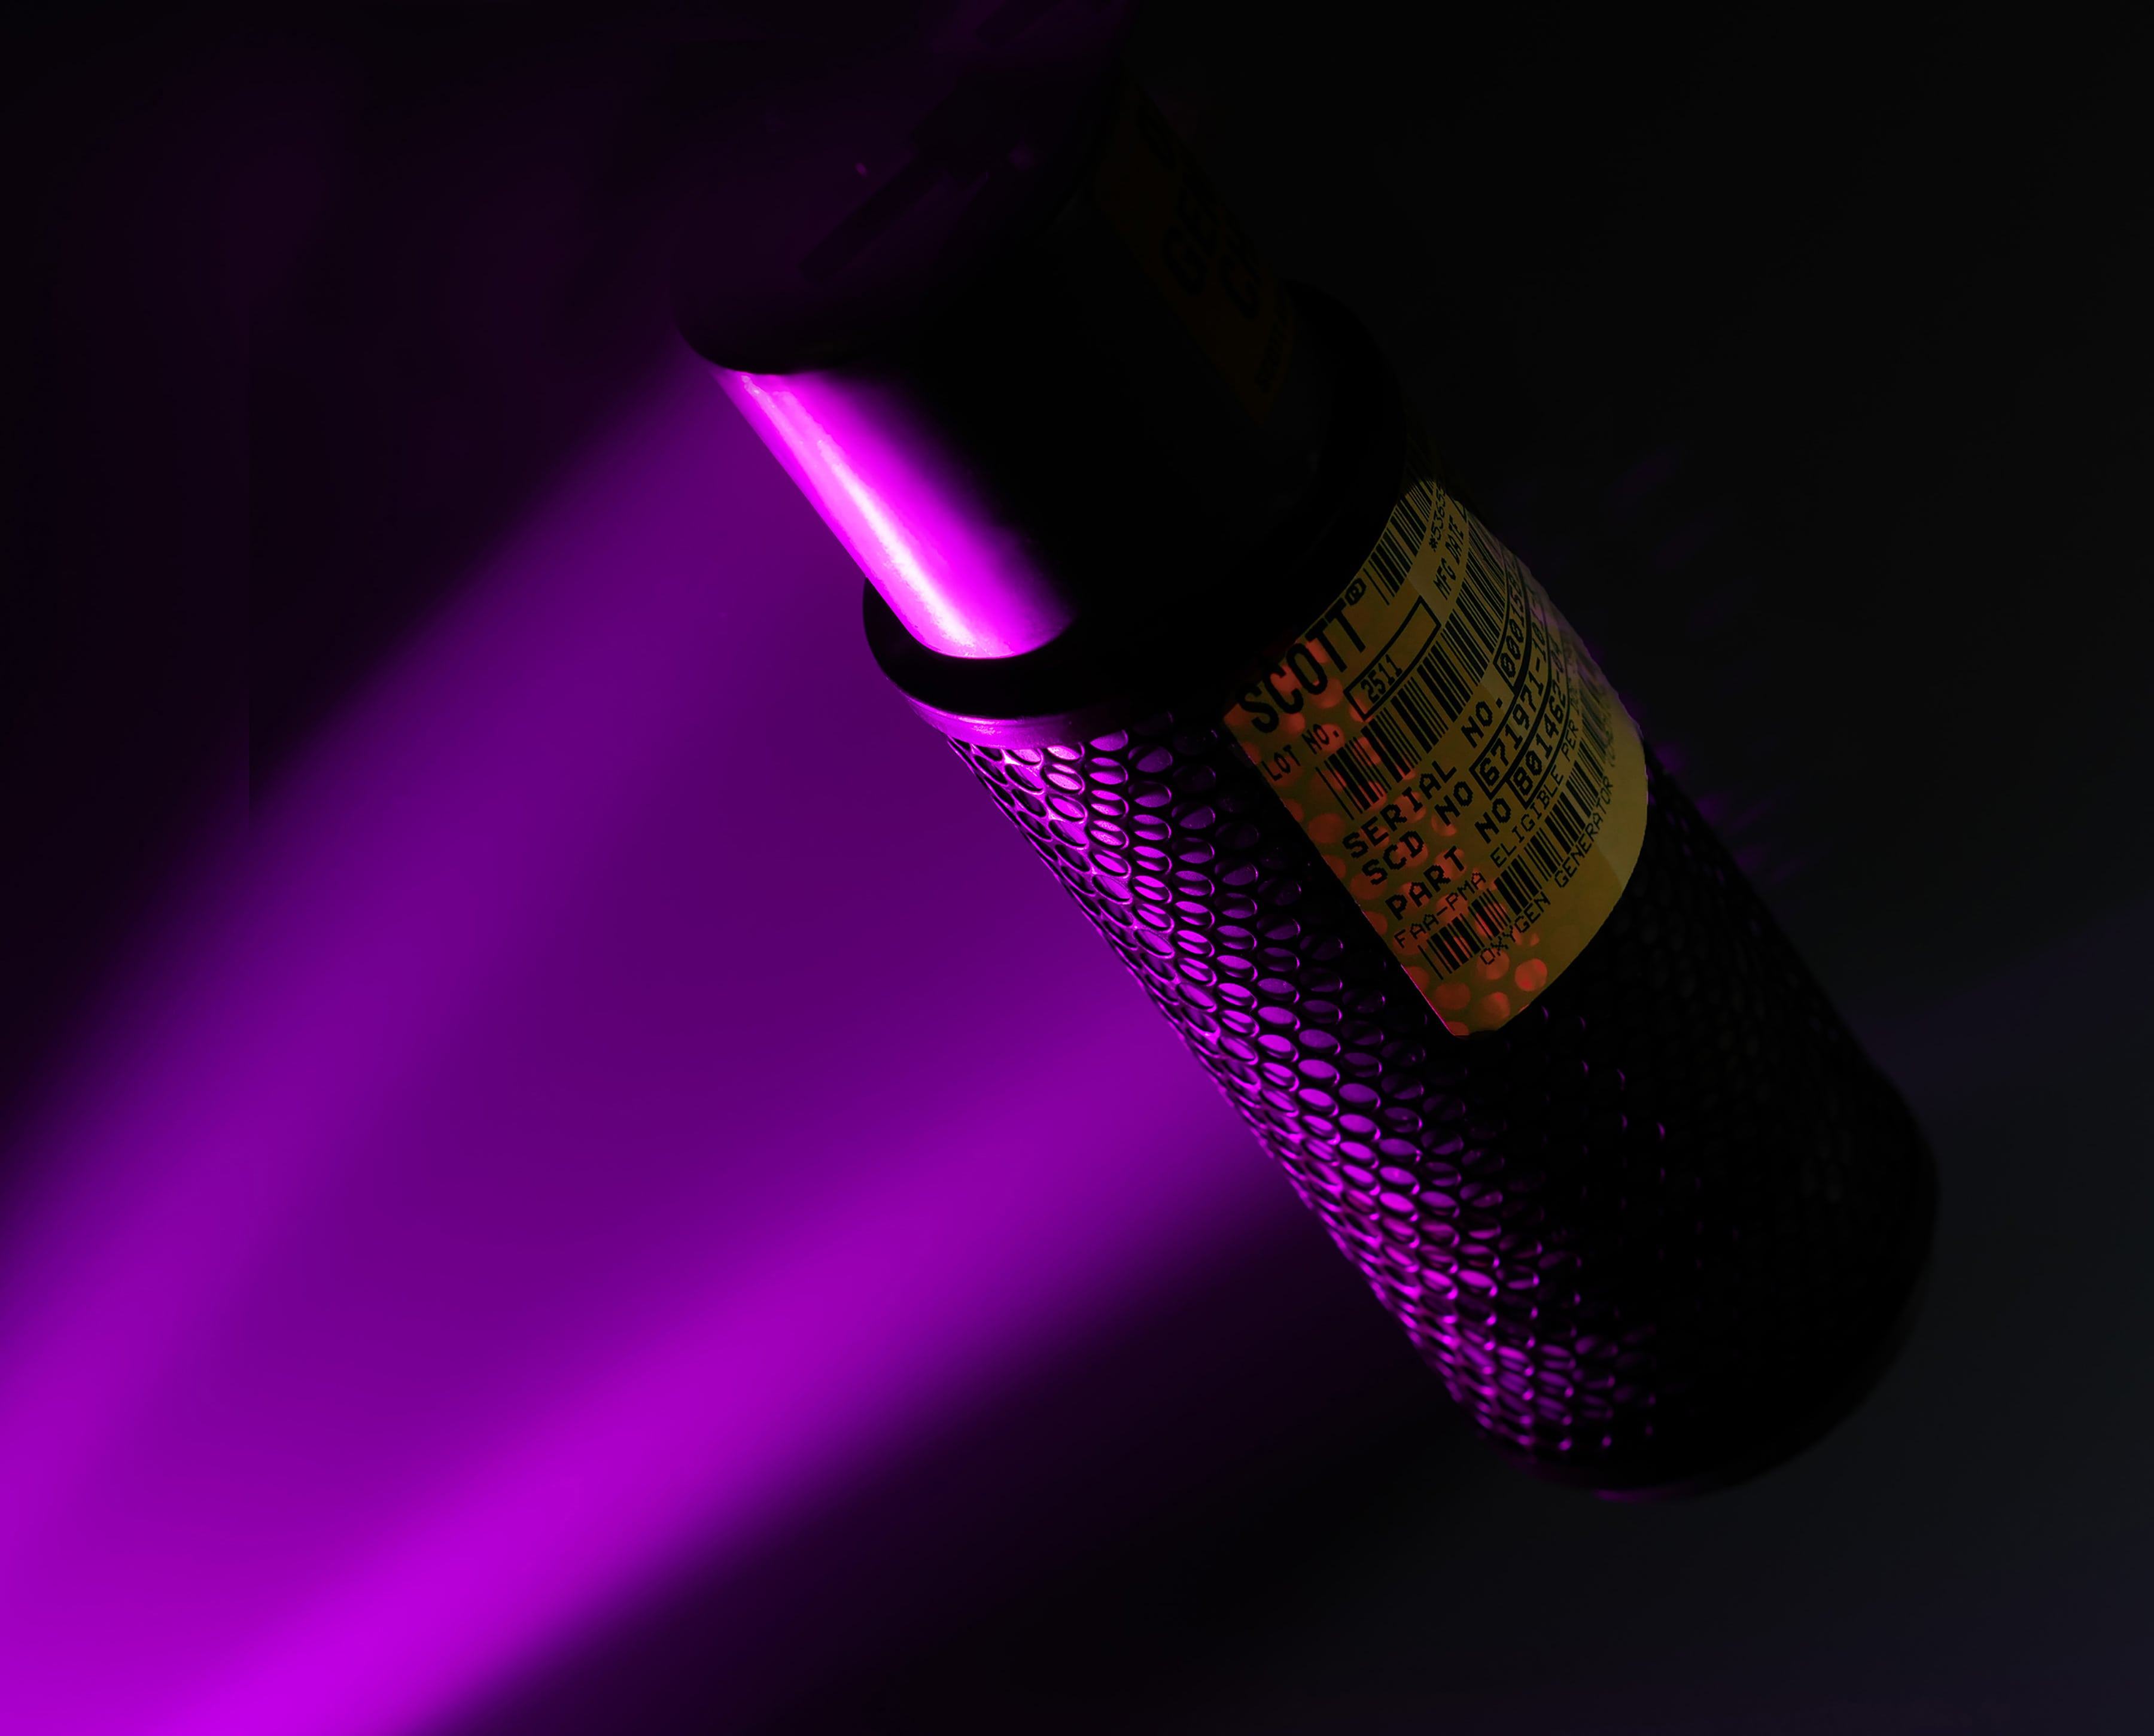 Close up of a small piece of equipment highlighted in purple light